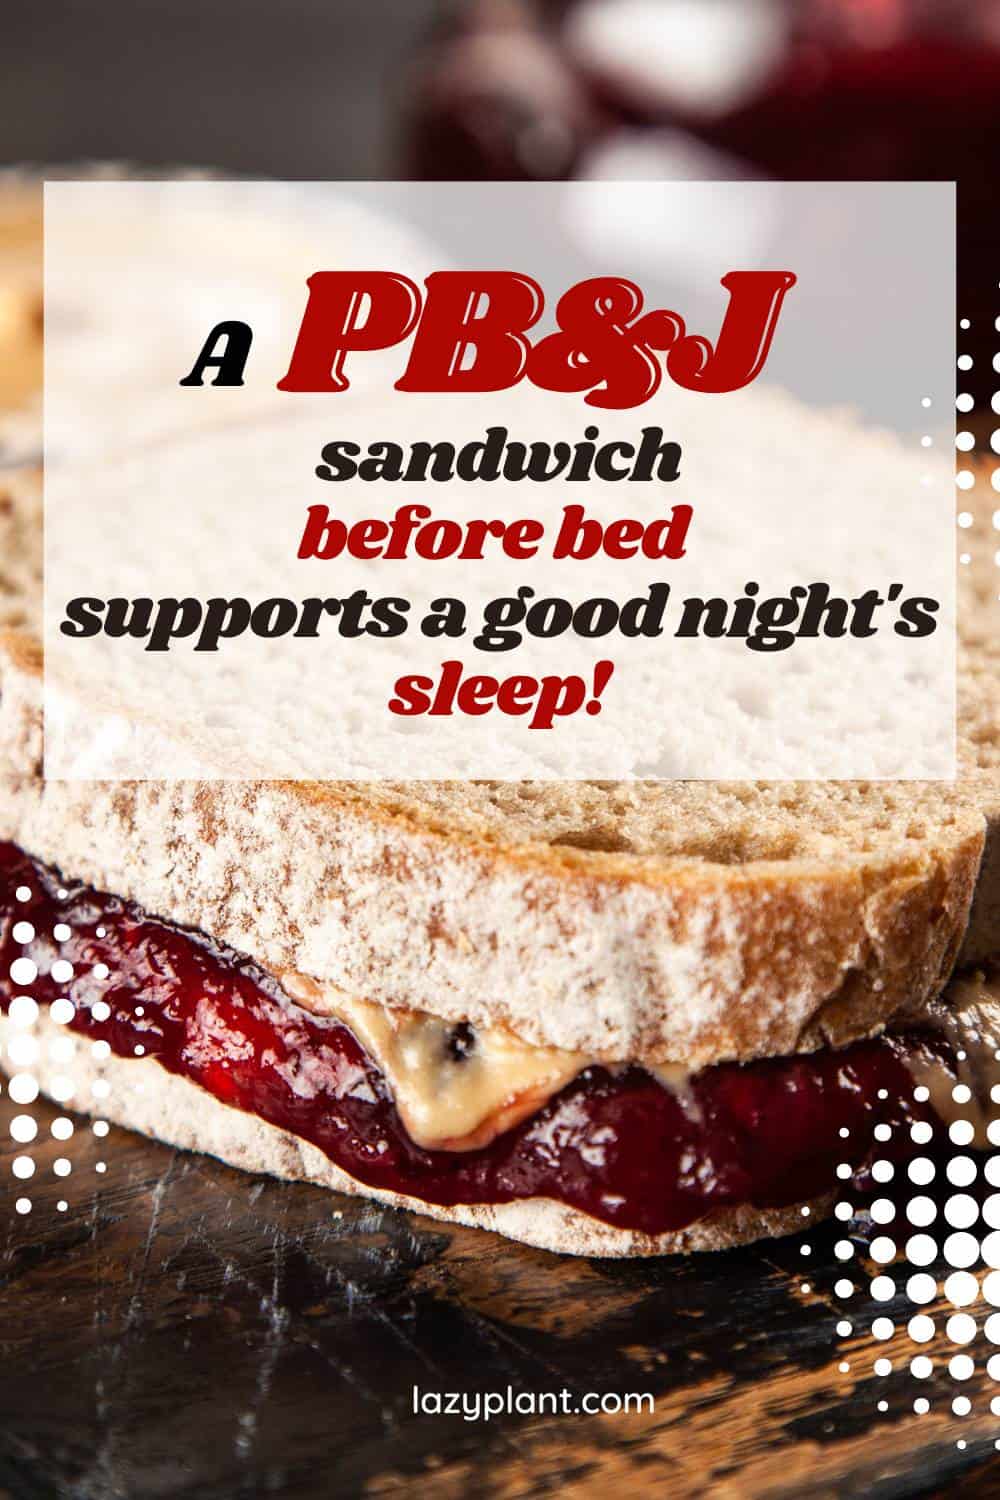 To support healthy weight management and better sleep, it is recommended to consume a peanut butter and jelly sandwich a few hours before bedtime, using only high-quality, sugar-free jelly, and whole wheat bread.